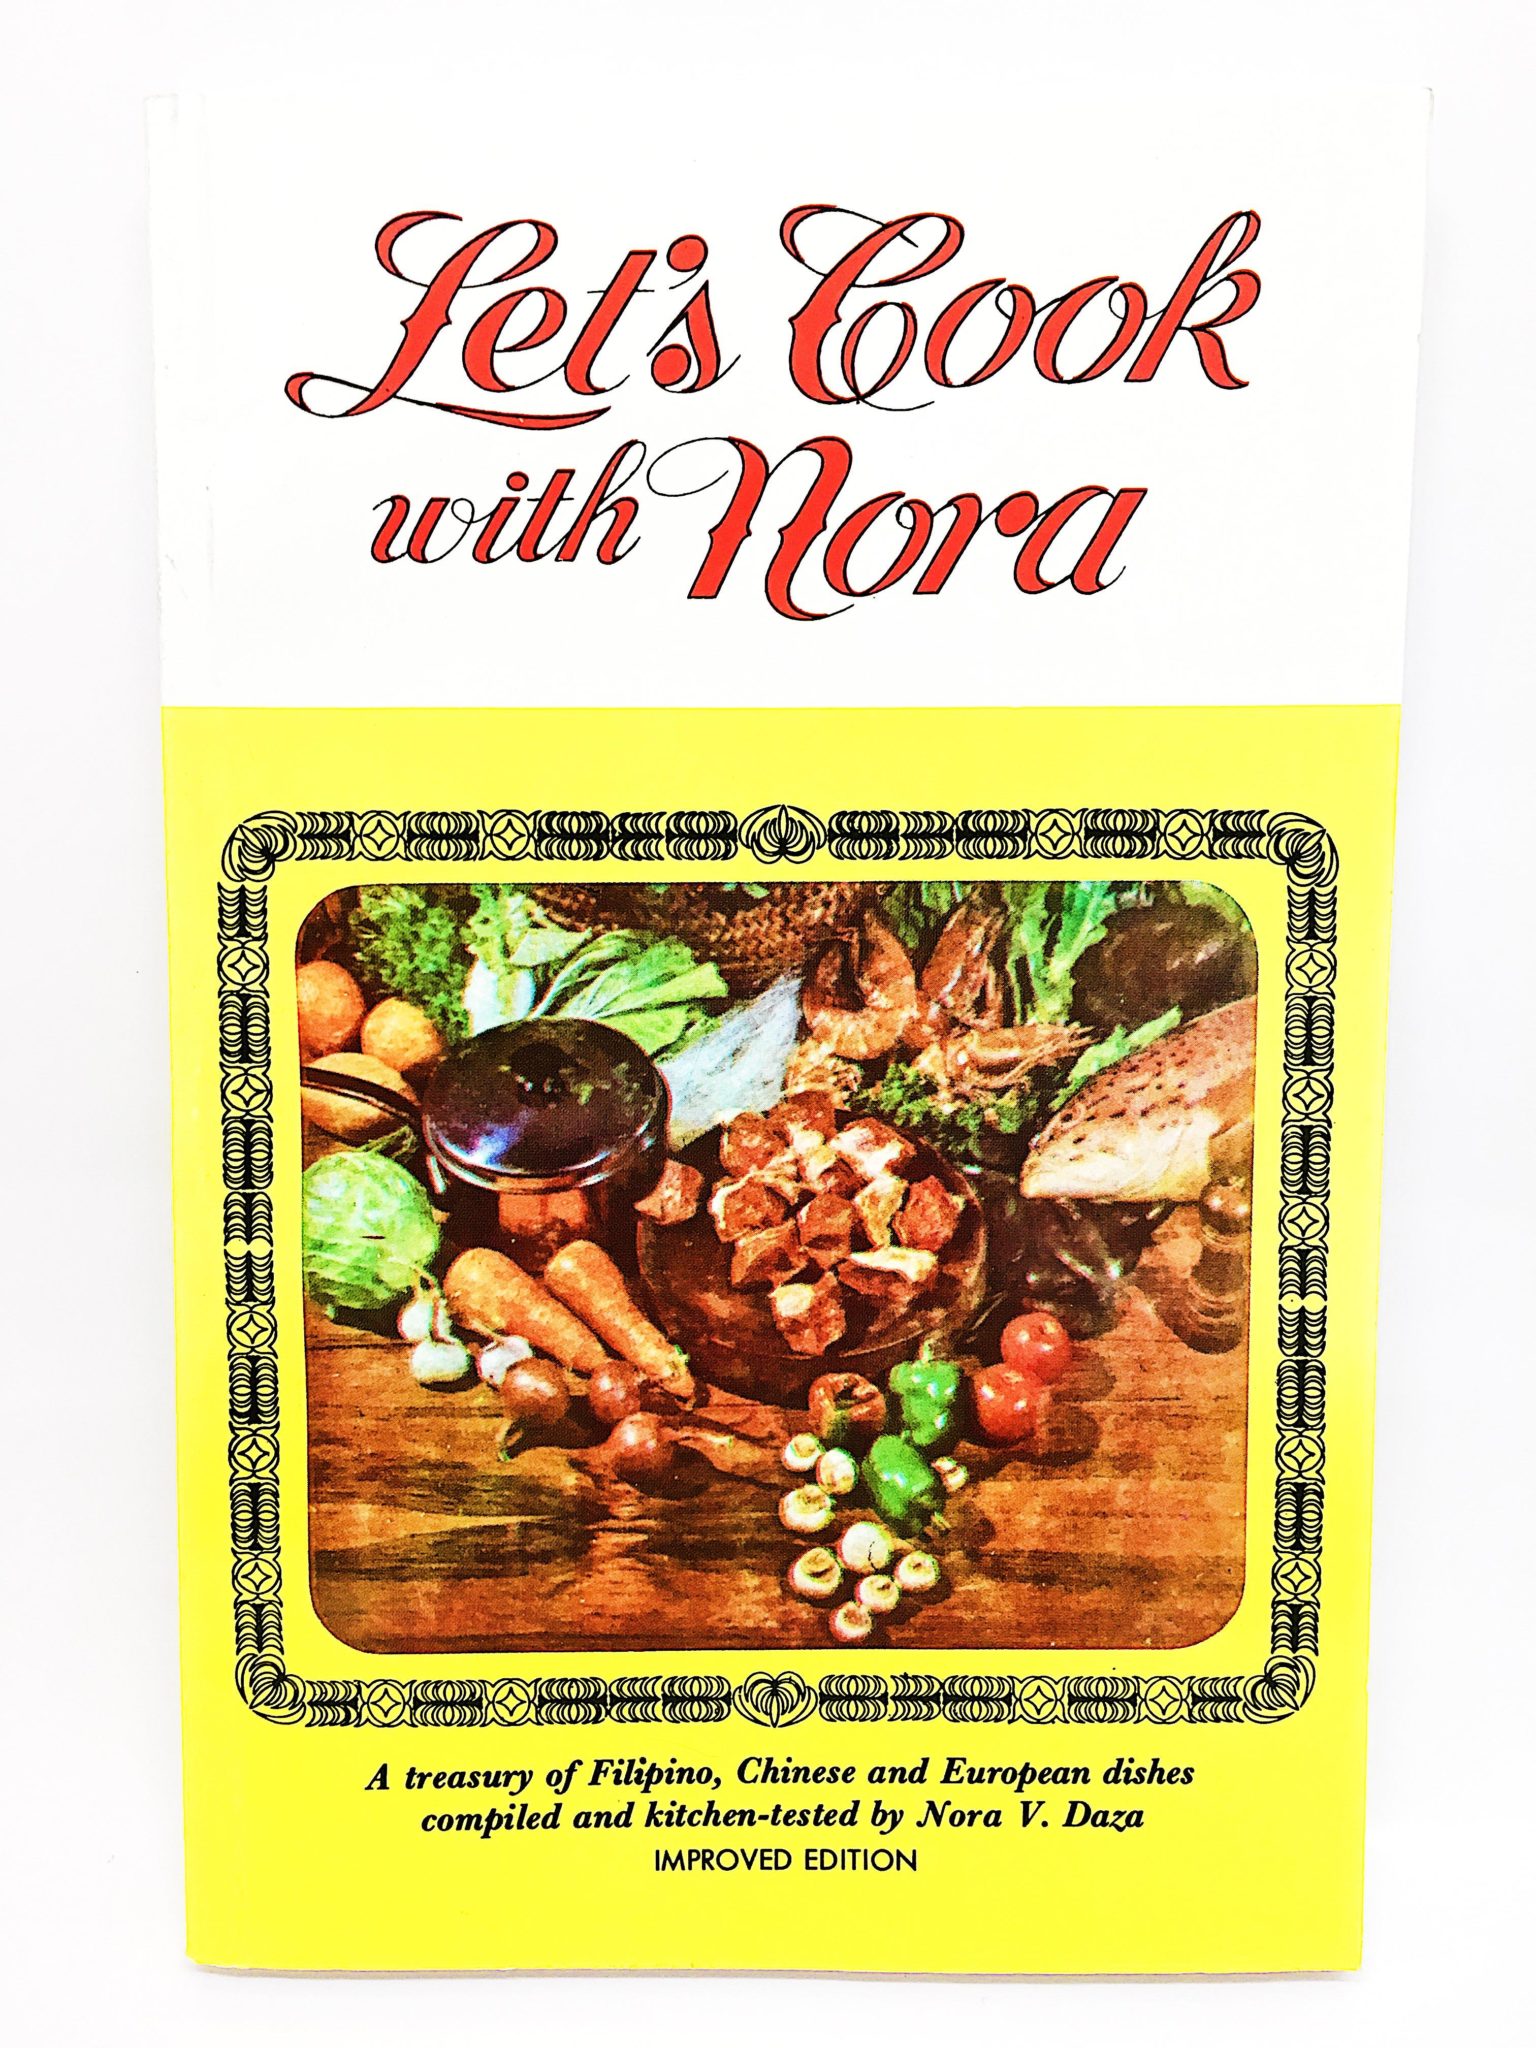 Definitive Filipino coobooks: "Let’s Cook with Nora: A treasury of Filipino, Chinese, and European dishes compiled and kitchen-tested"